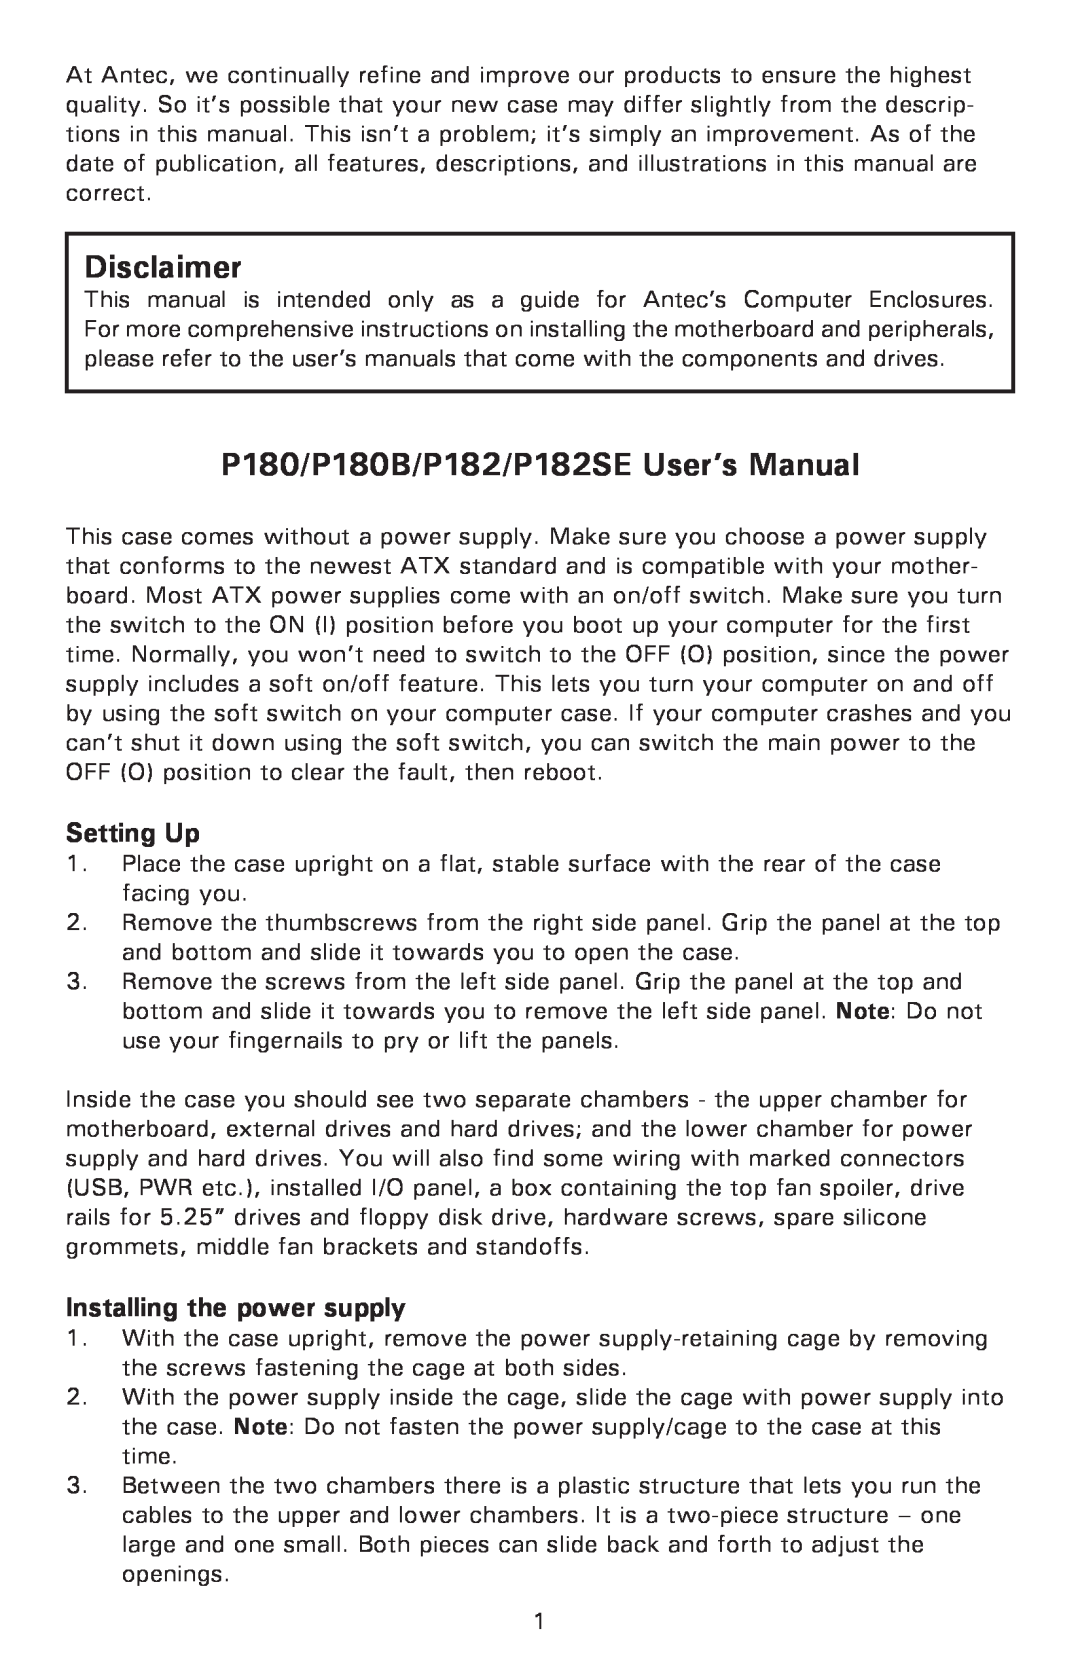 Antec user manual Disclaimer, P180/P180B/P182/P182SE User’s Manual, Setting Up, Installing the power supply 